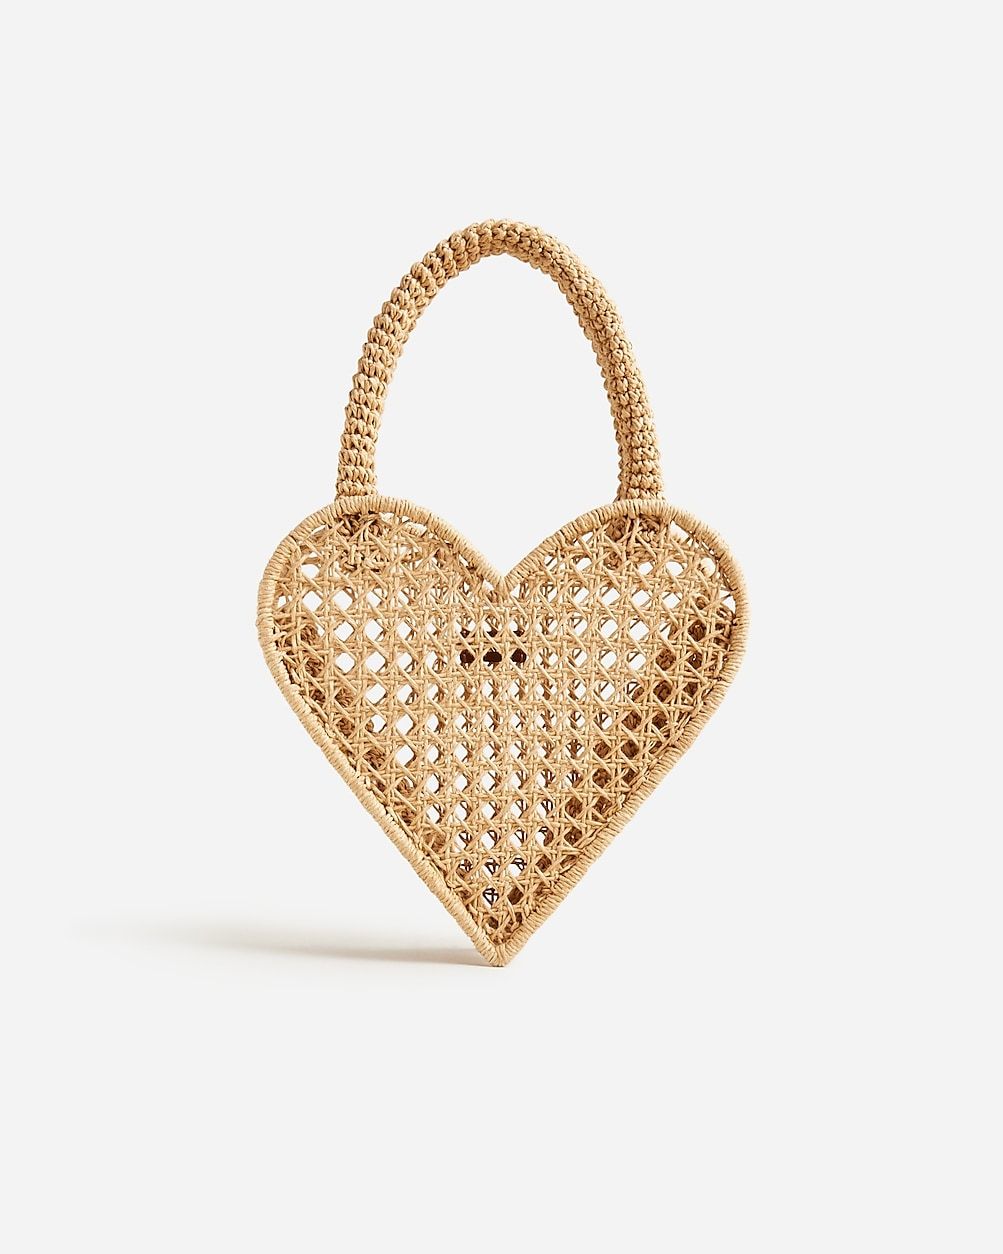 How to wear itnewSmall heart straw bag$98.00NaturalOne SizeSize & Fit Information  Add to Bag4 pa... | J.Crew US